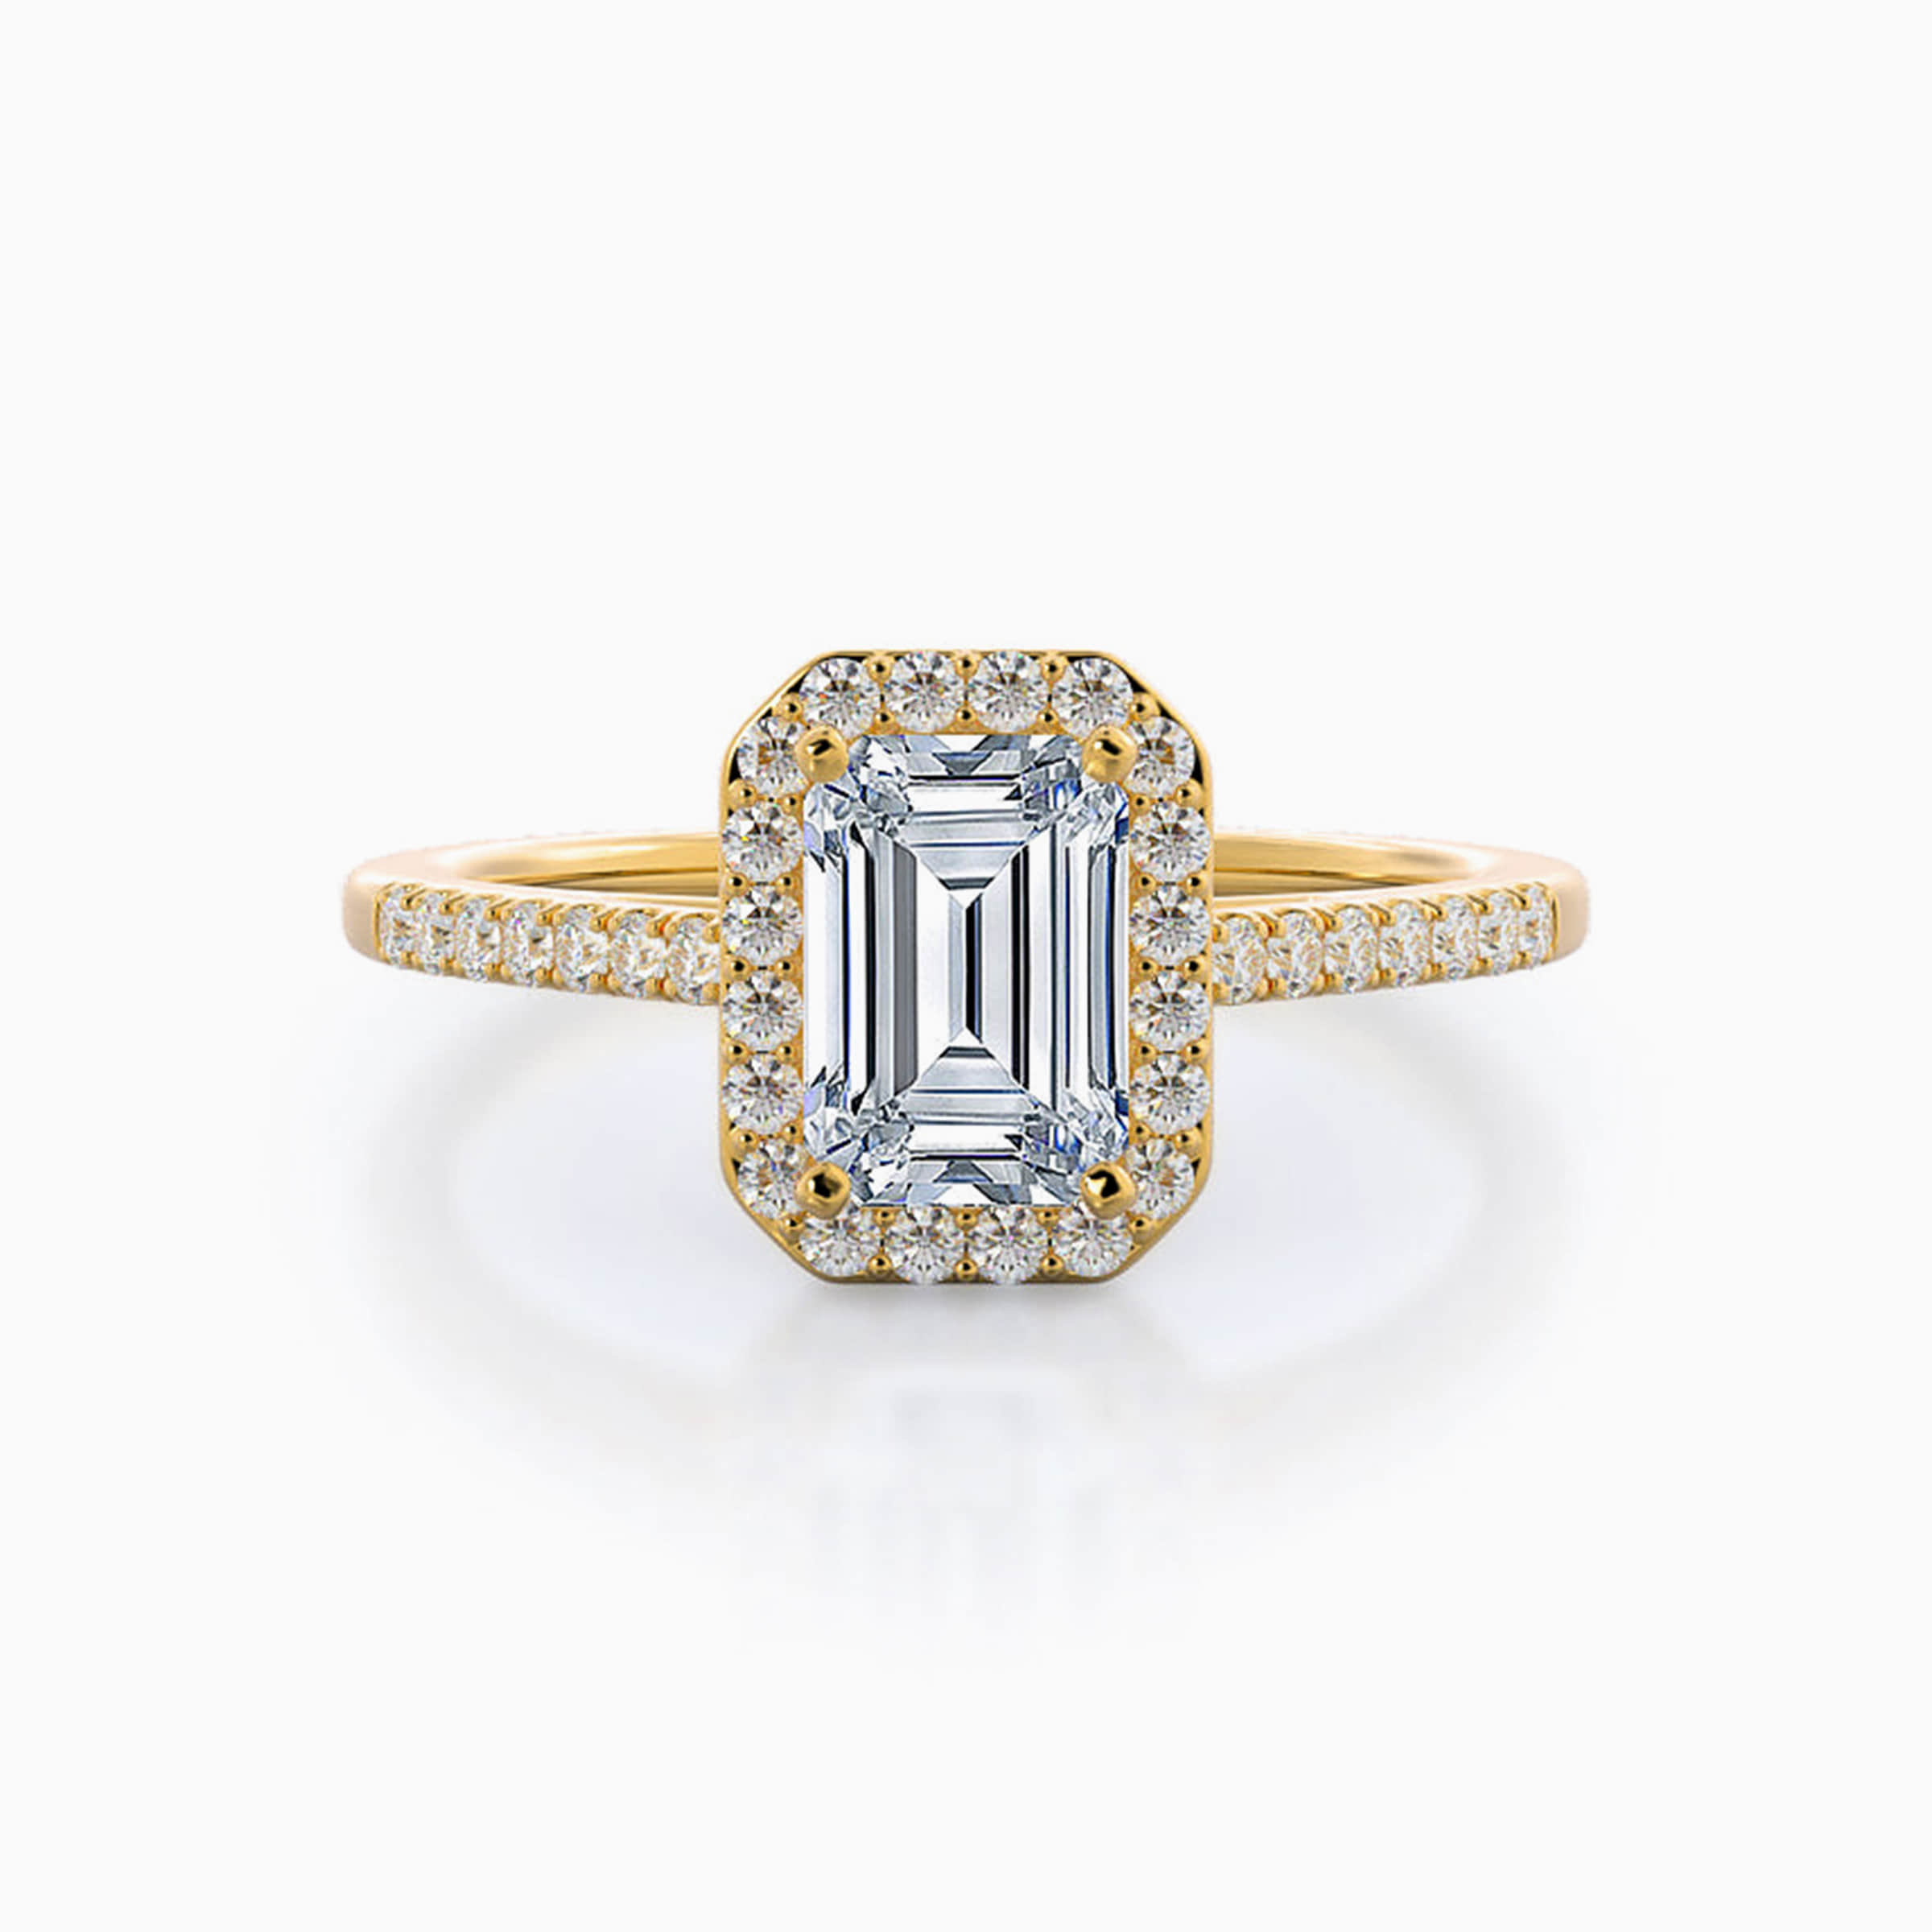 Darry Ring 3 carat emerald cut halo engagement ring in yellow gold